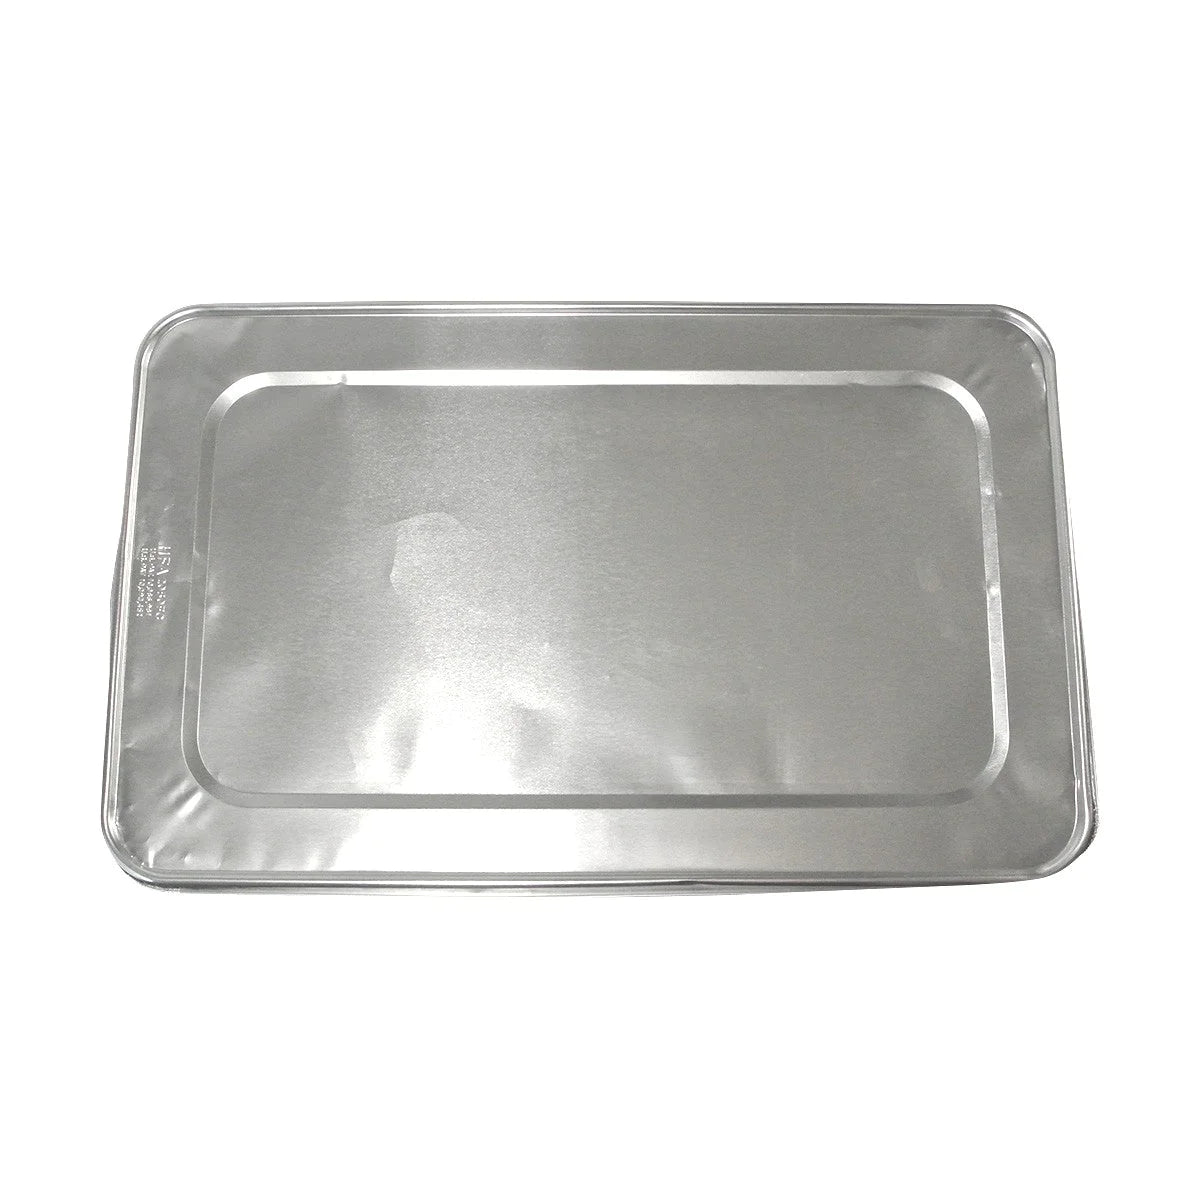 Roaster Ultra Heavy Duty Aluminum Pan (2 Count) - Pristine Party